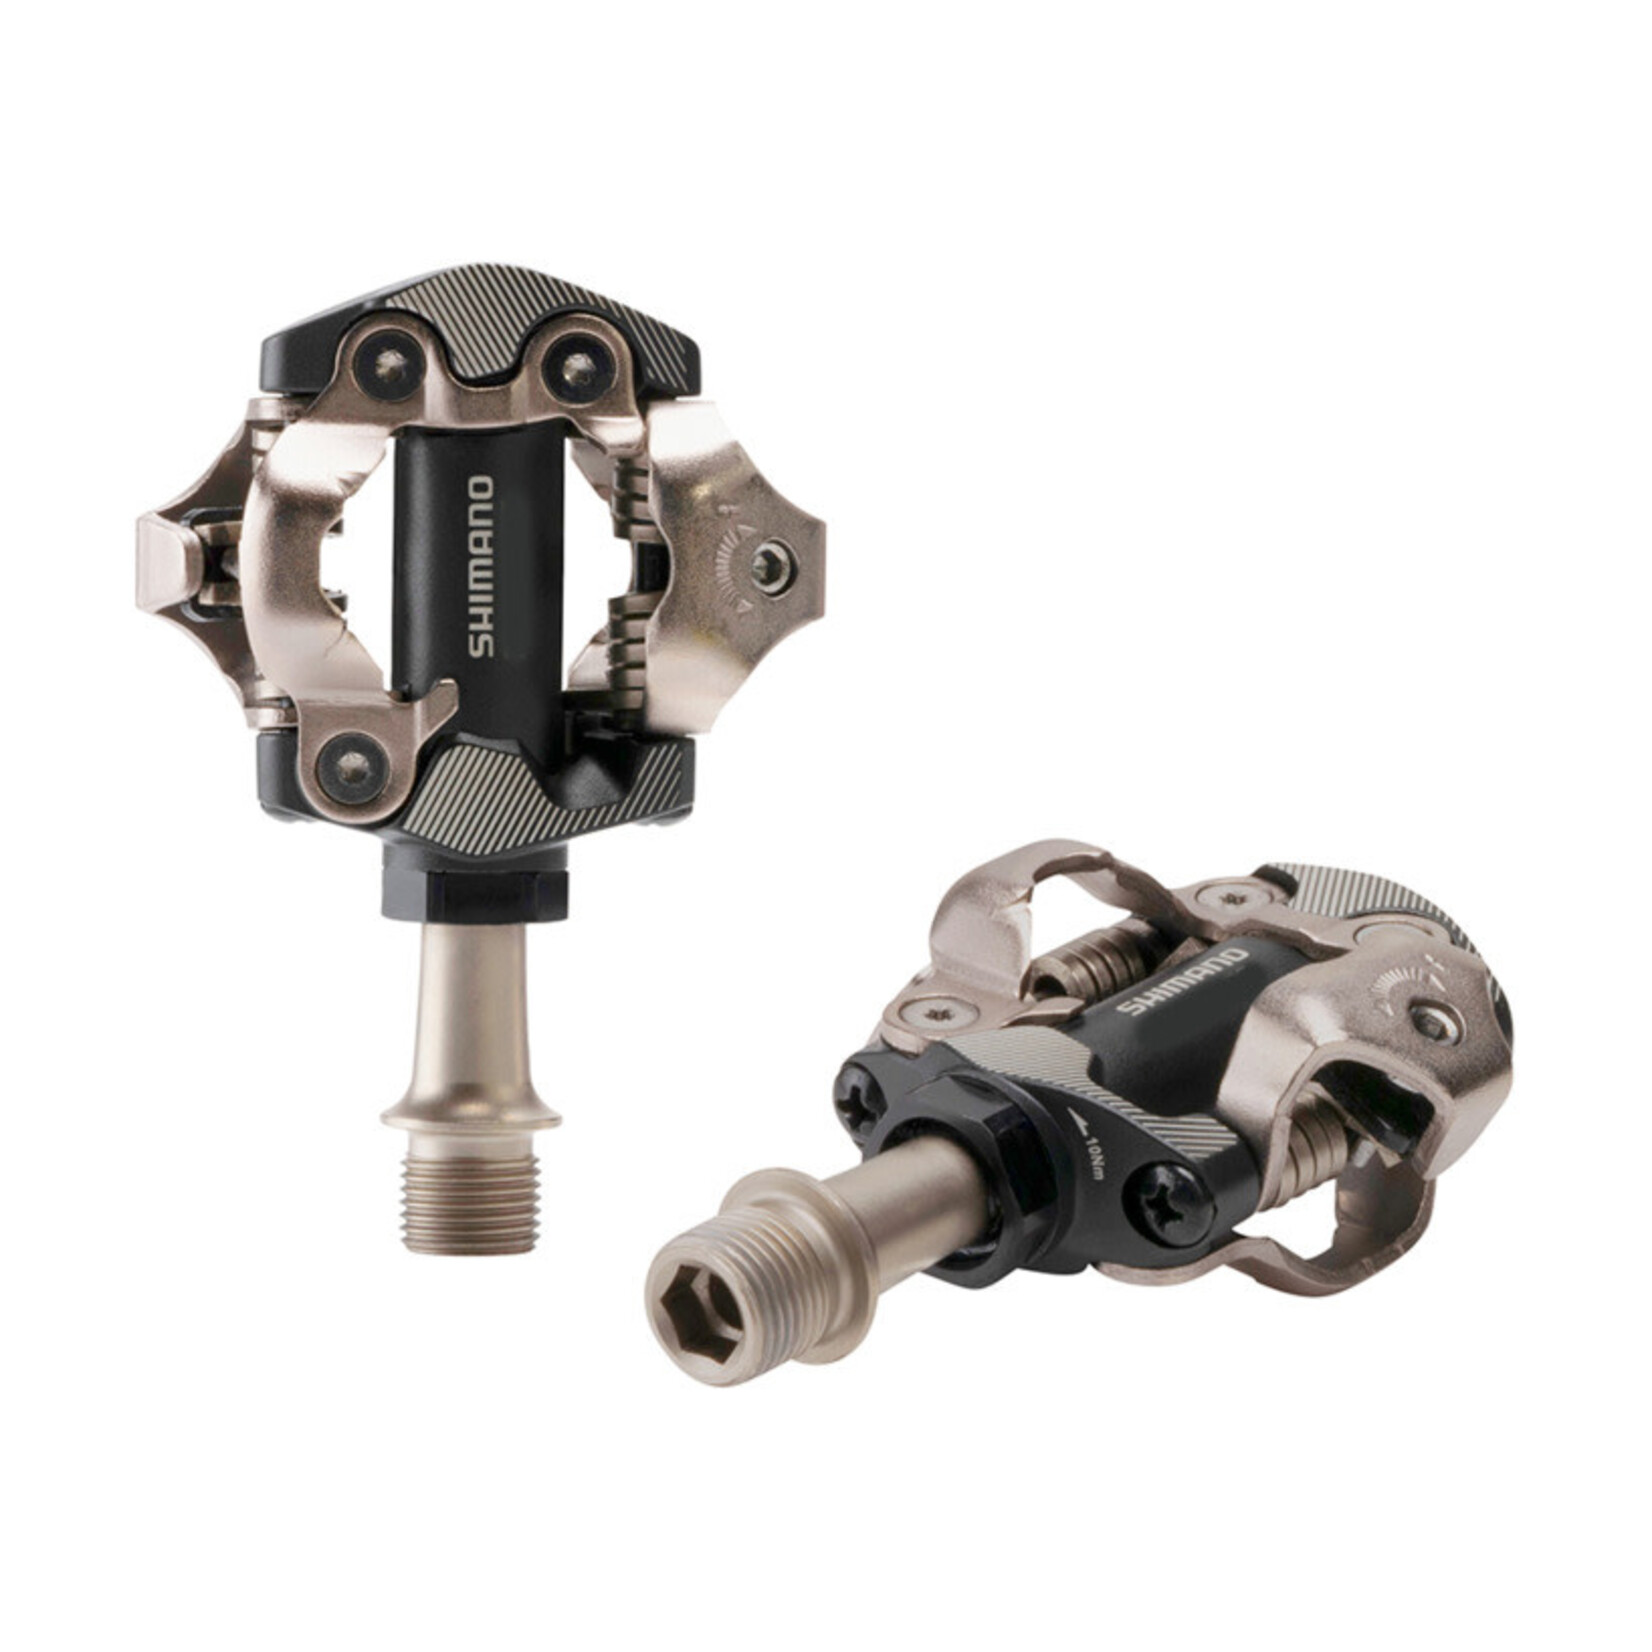 Shimano PD-M8100 Deore XT  SPD Pedals w/ Cleats